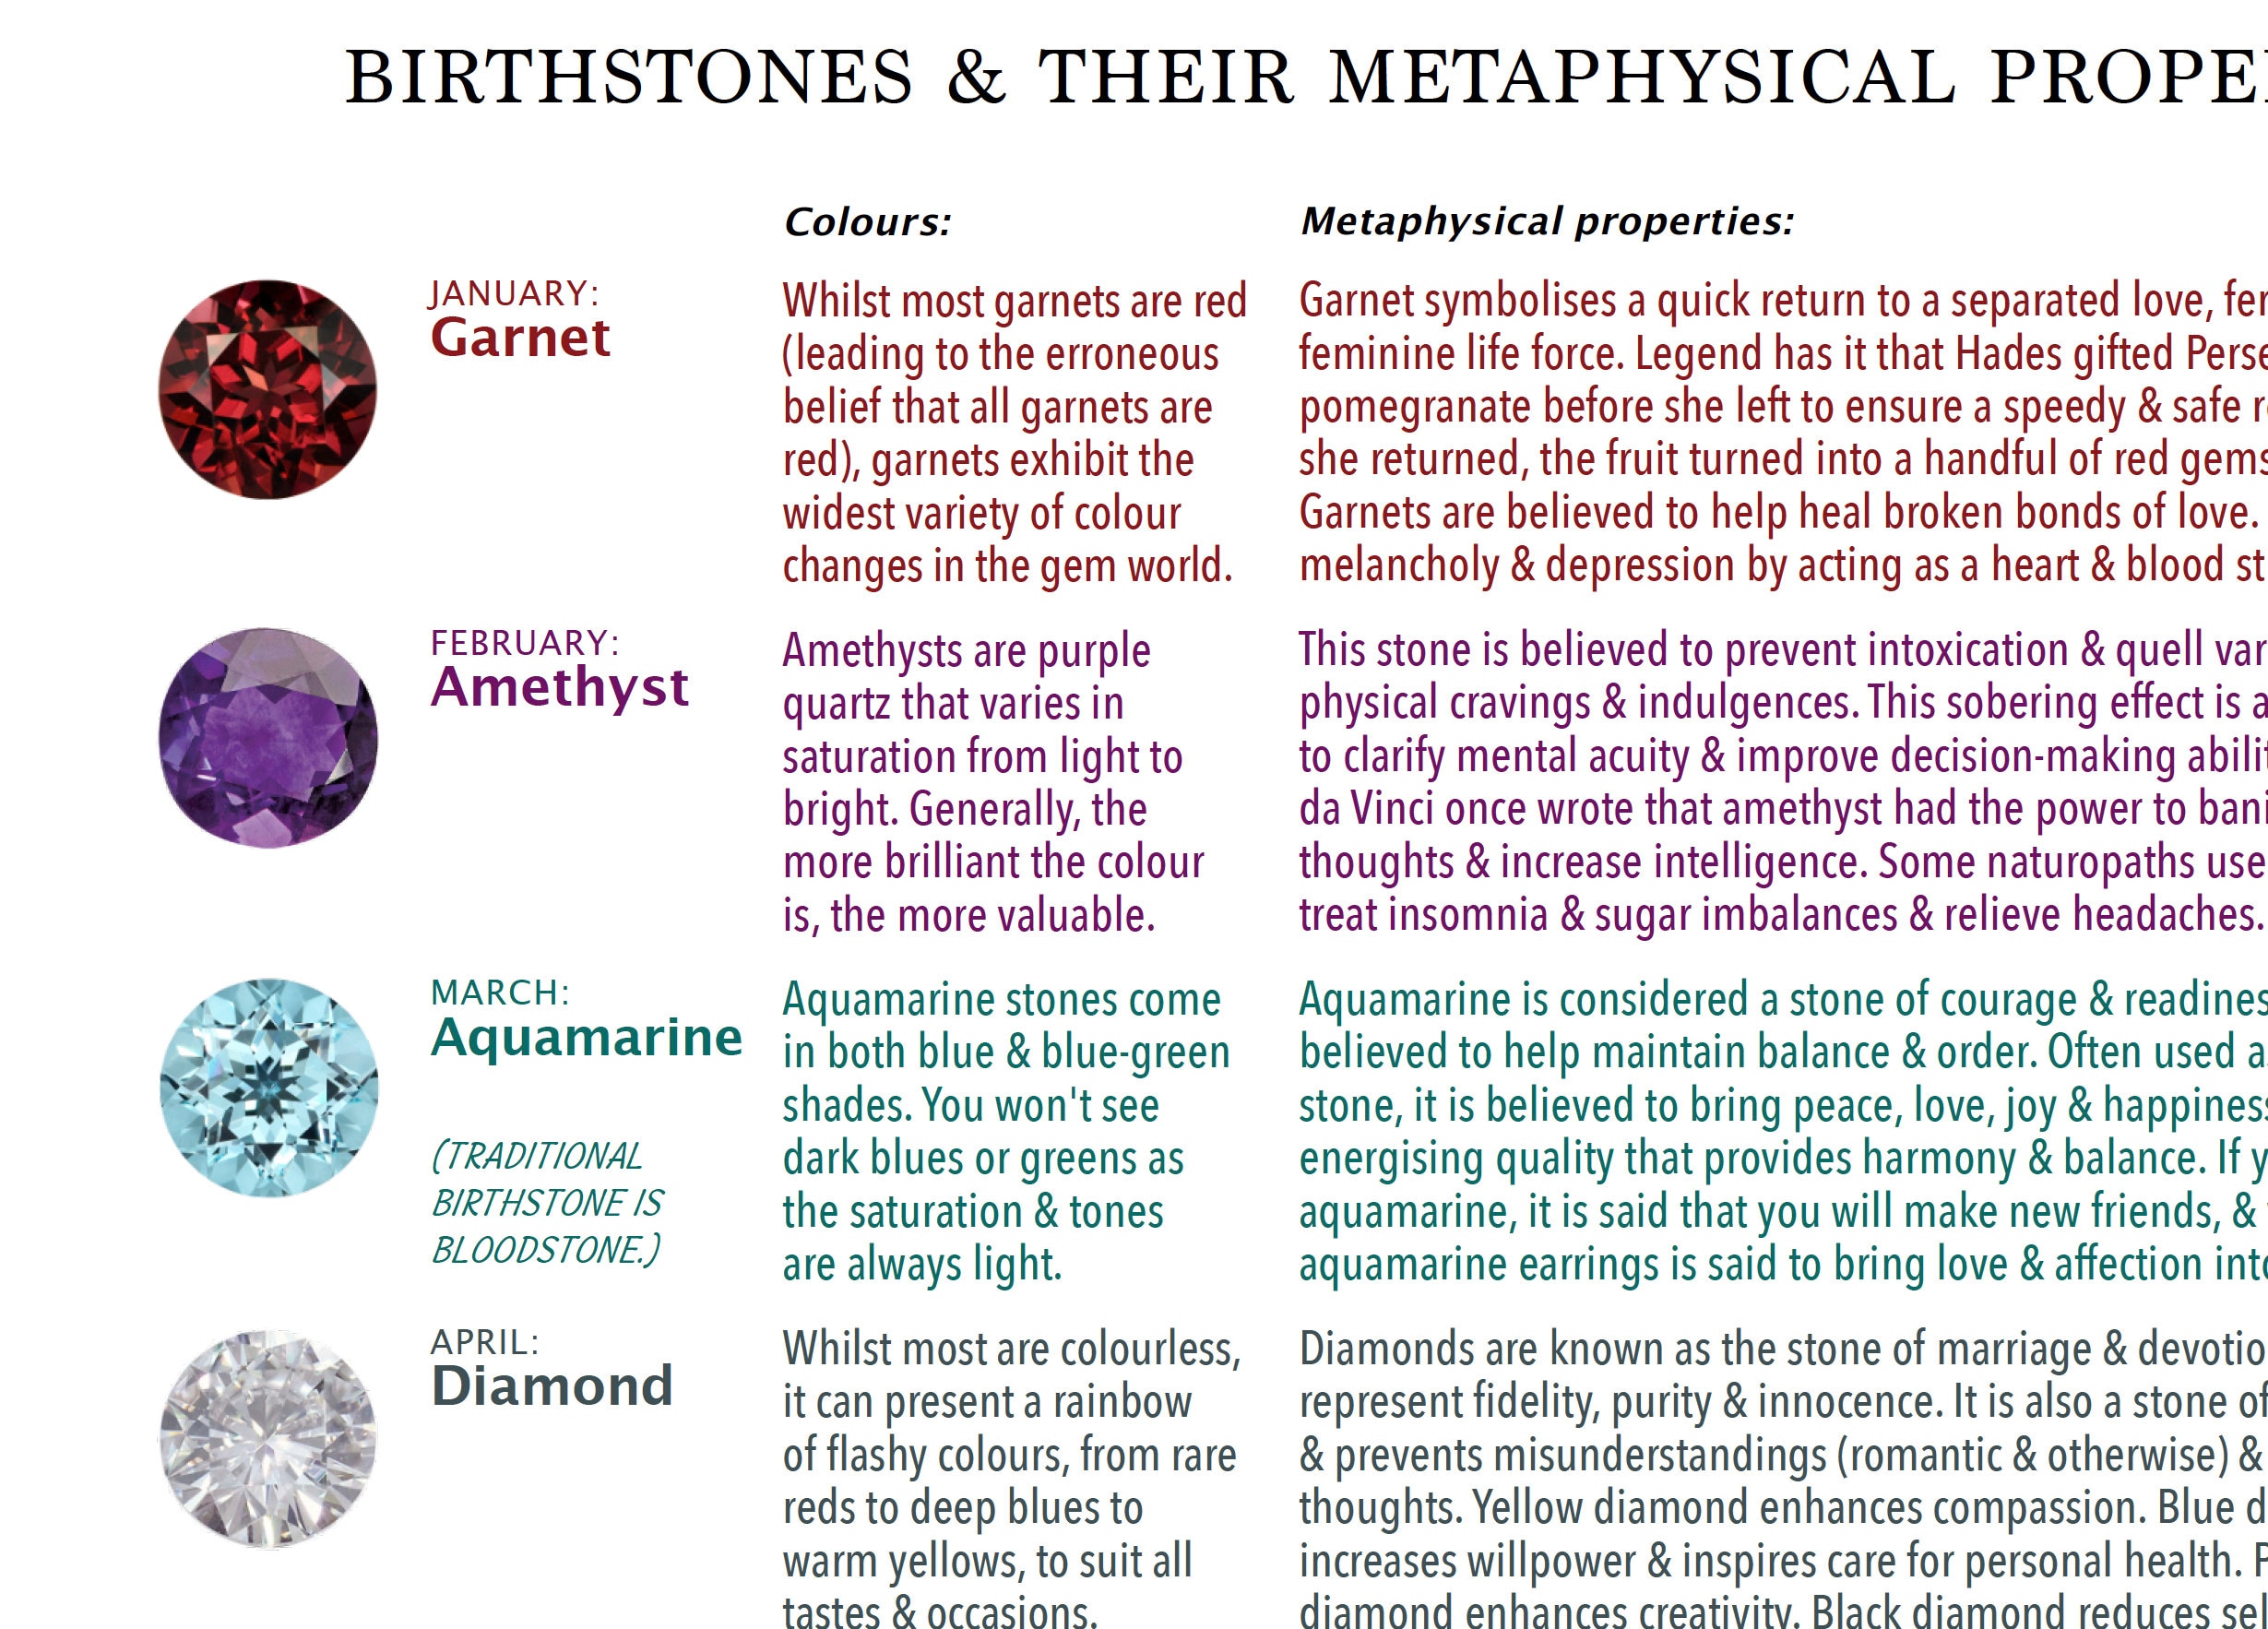 Birthstones & Their Metaphysical Meanings 'at-a-glance' Reference Chart ...